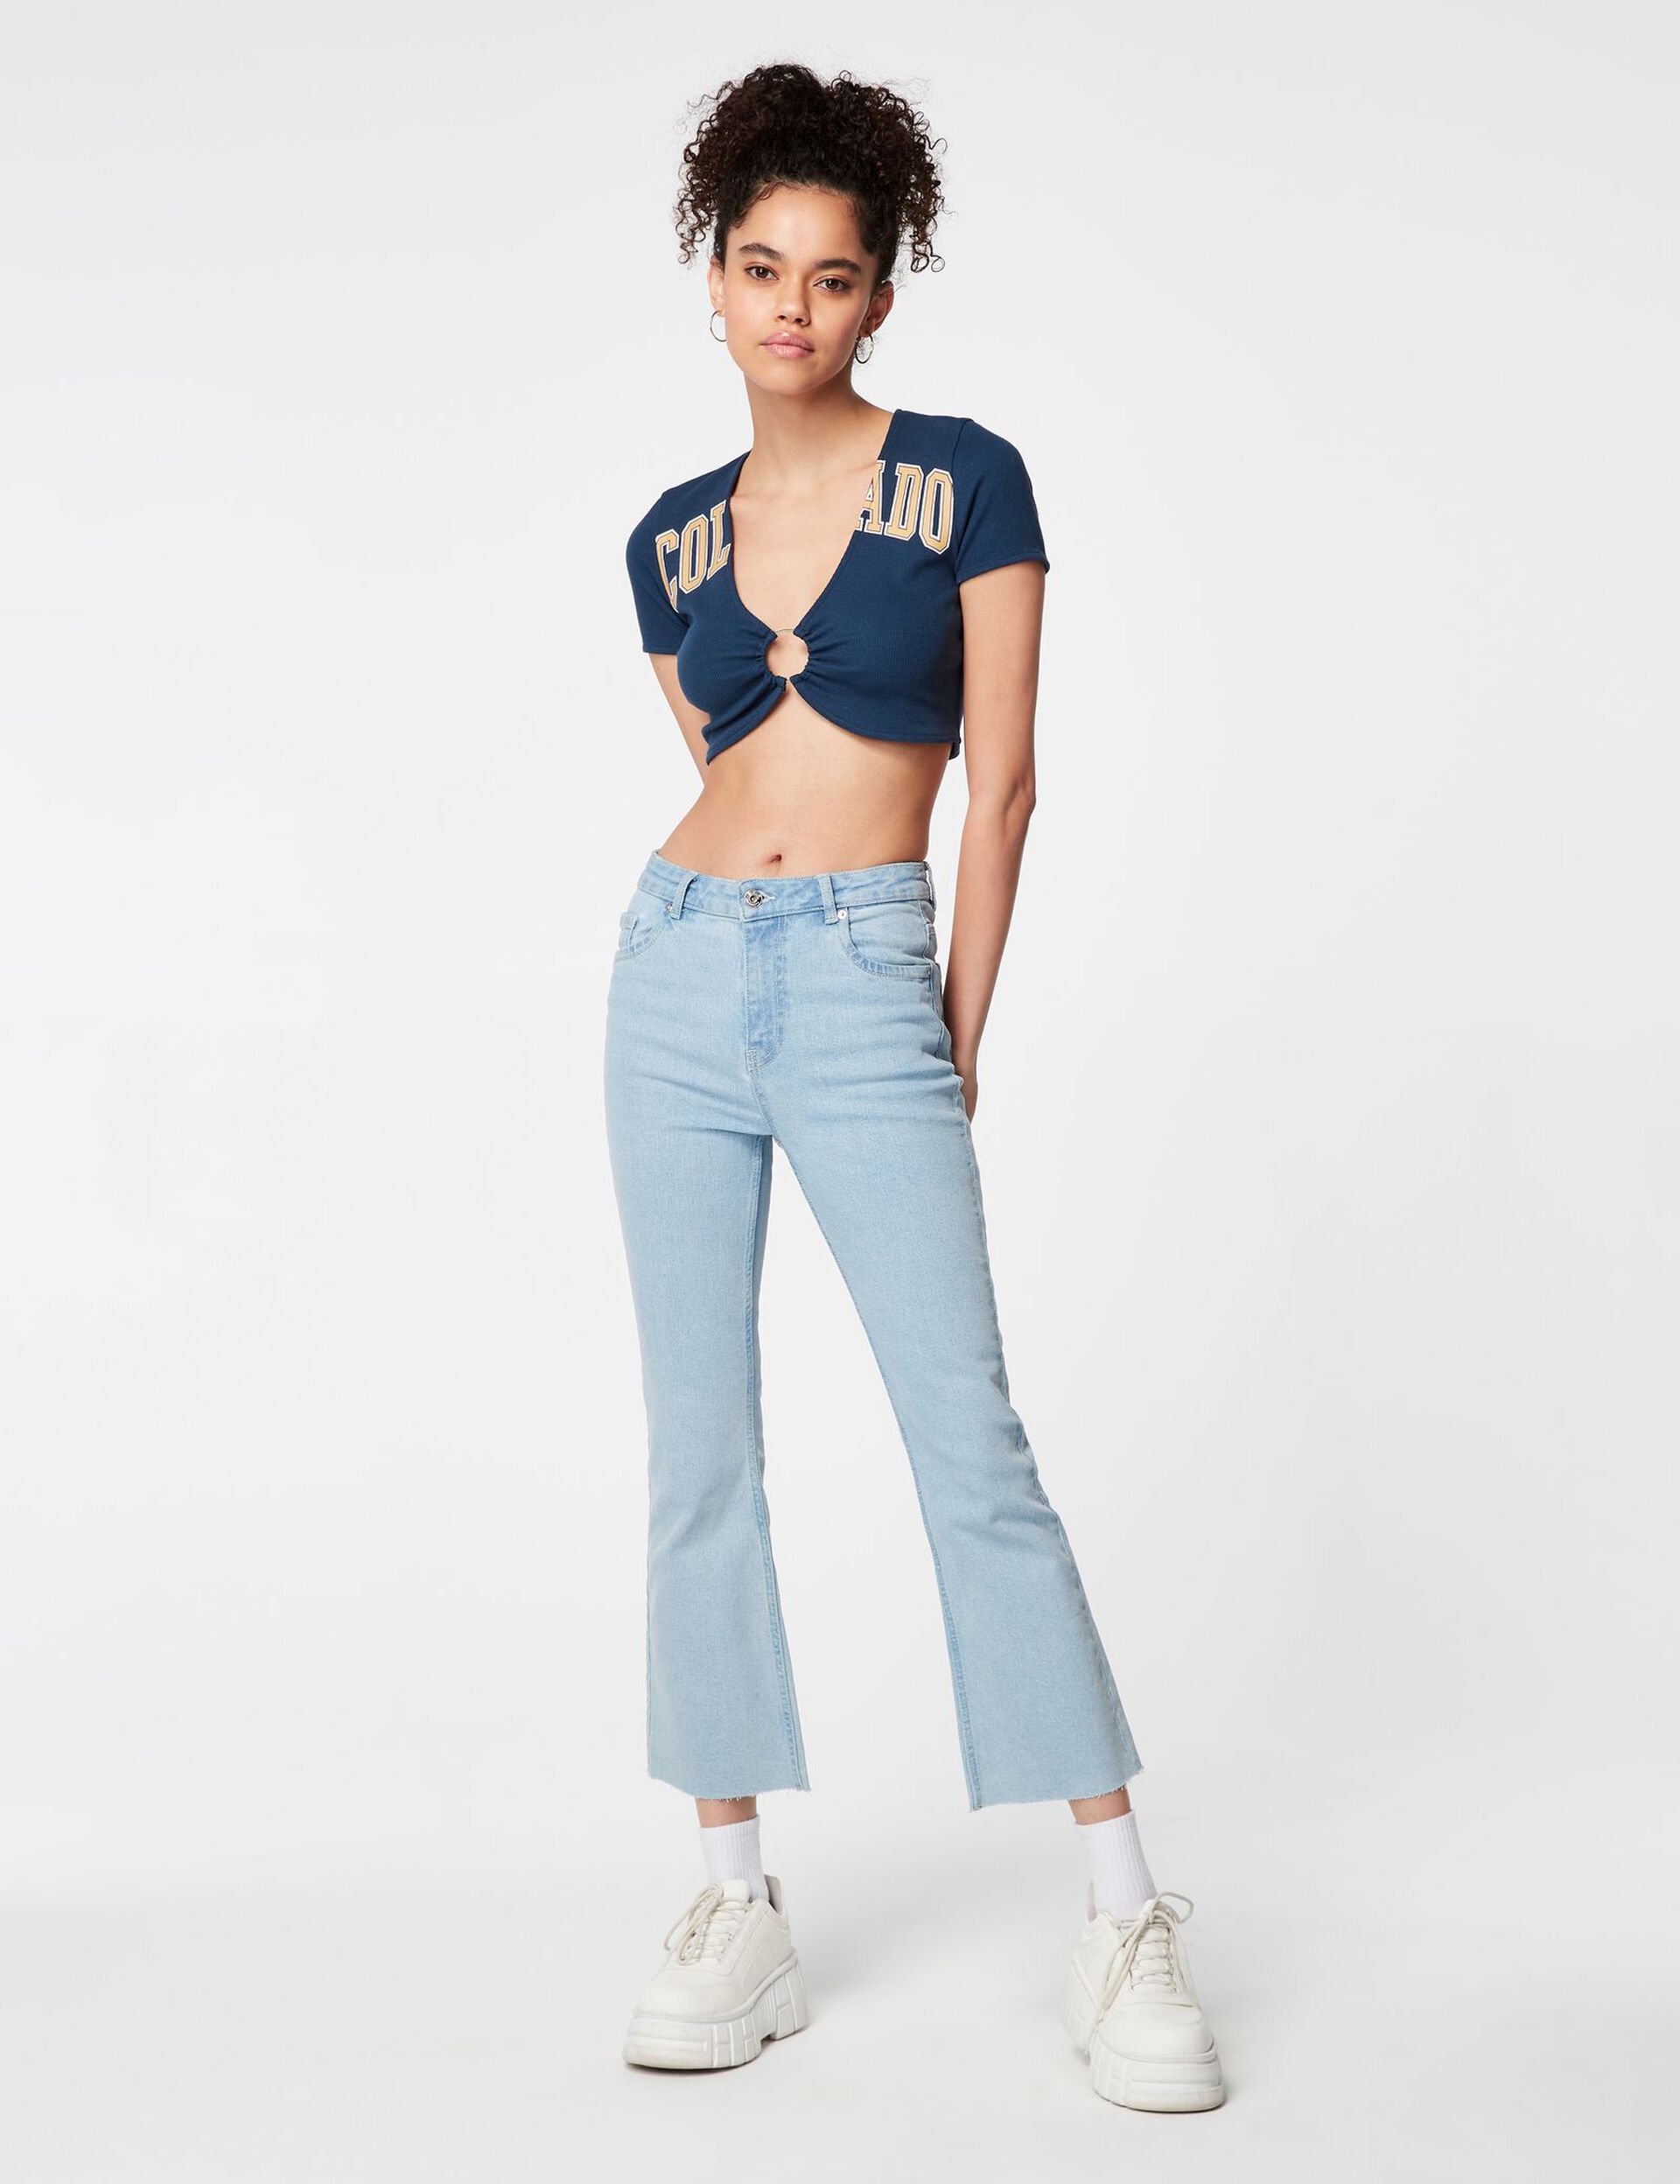 Jean cropped flare